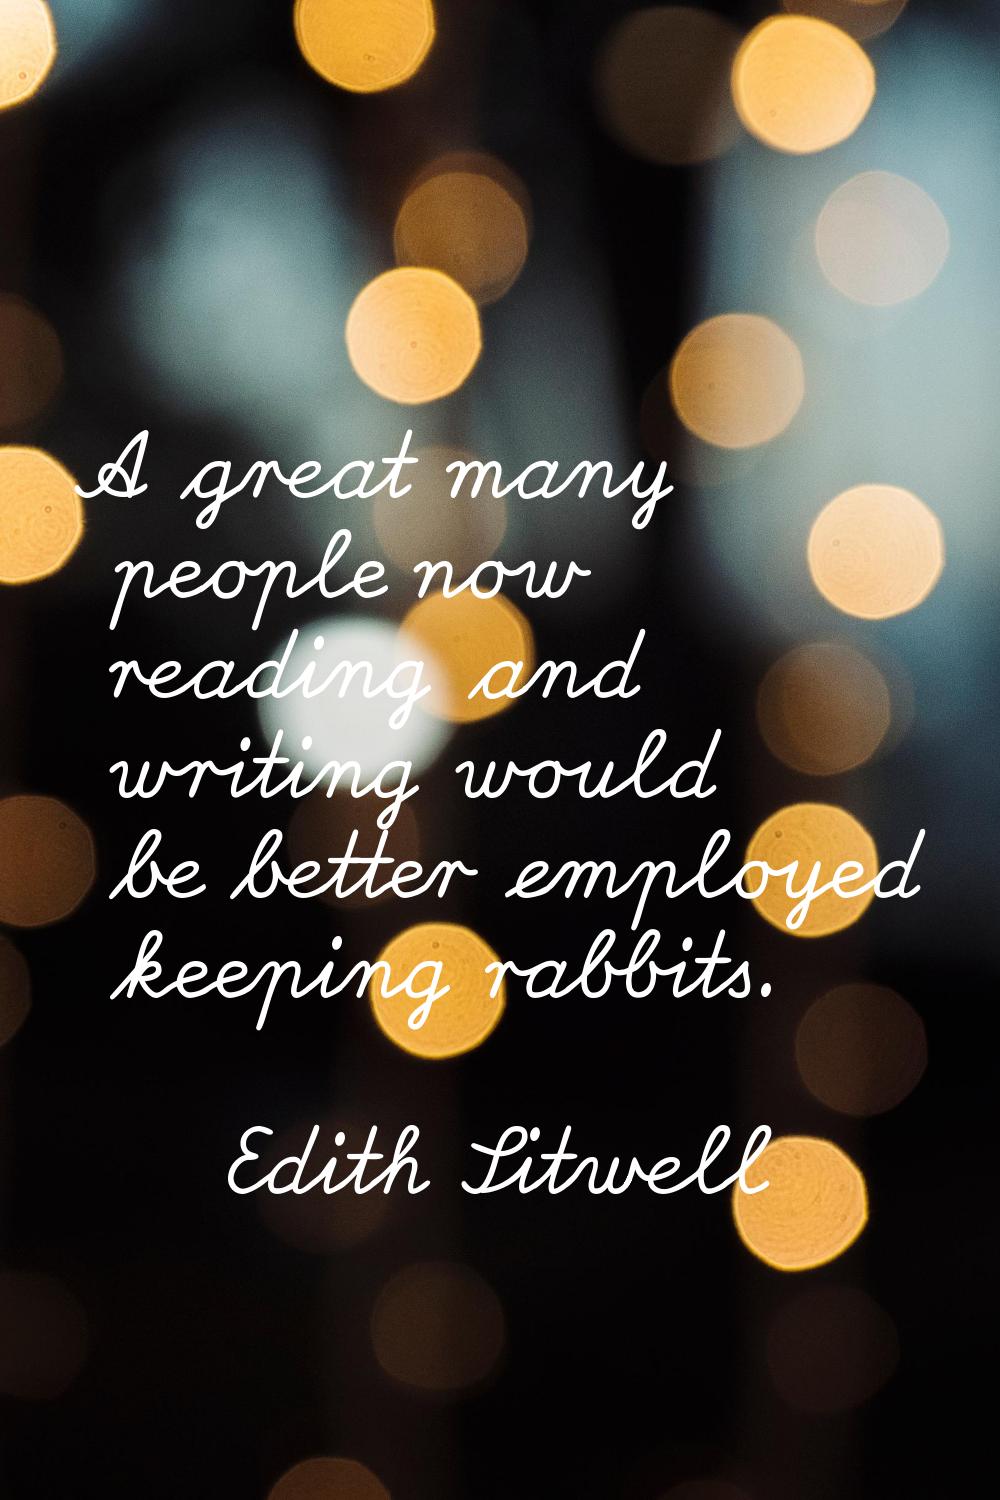 A great many people now reading and writing would be better employed keeping rabbits.